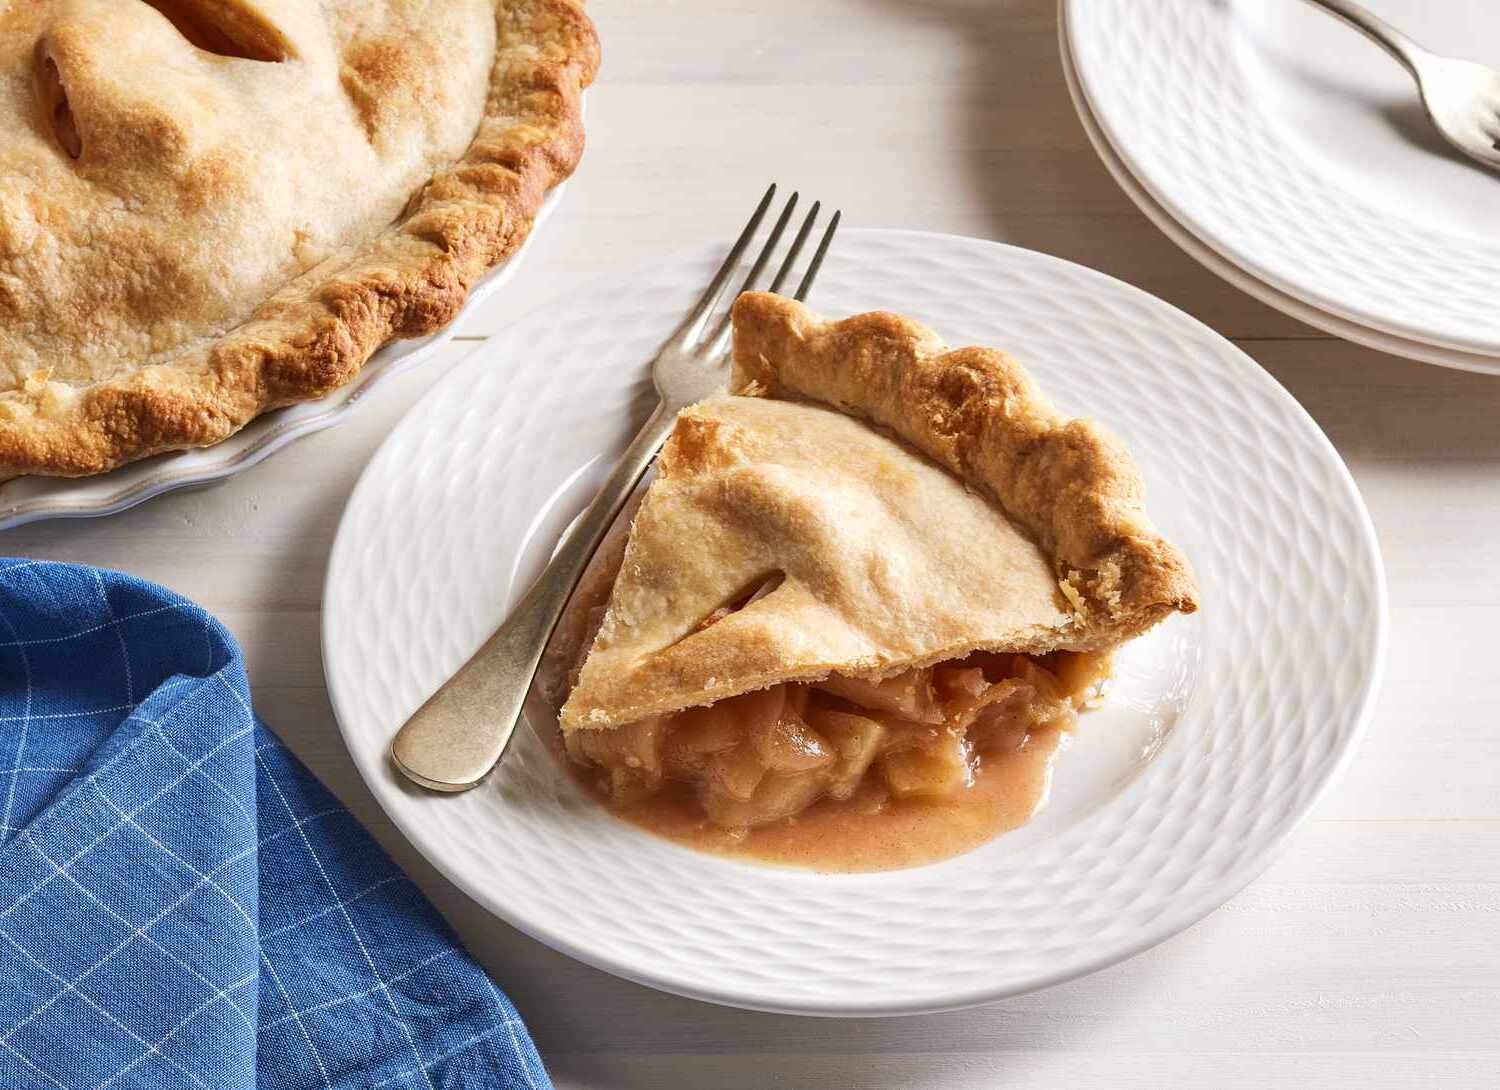 8-facts-about-national-apple-pie-day-may-13th